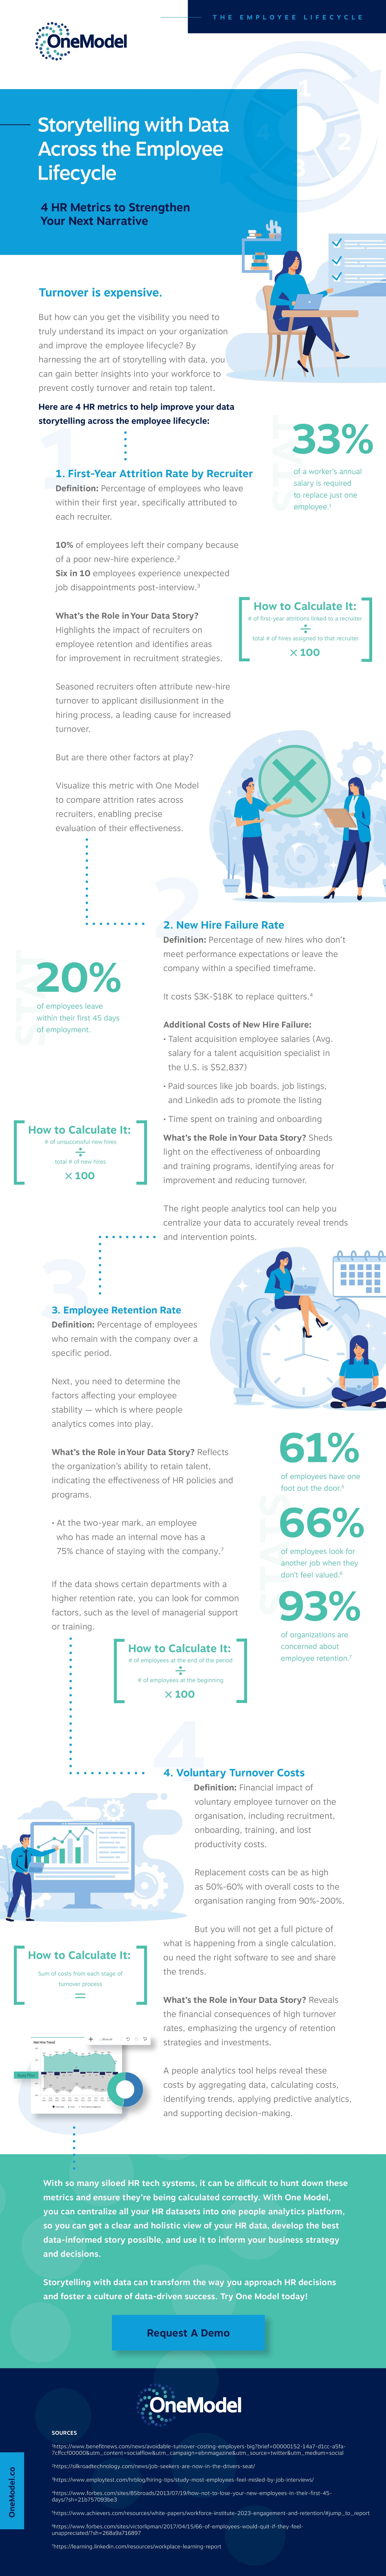 One-Model-Storytelling-with-Data-Infographic